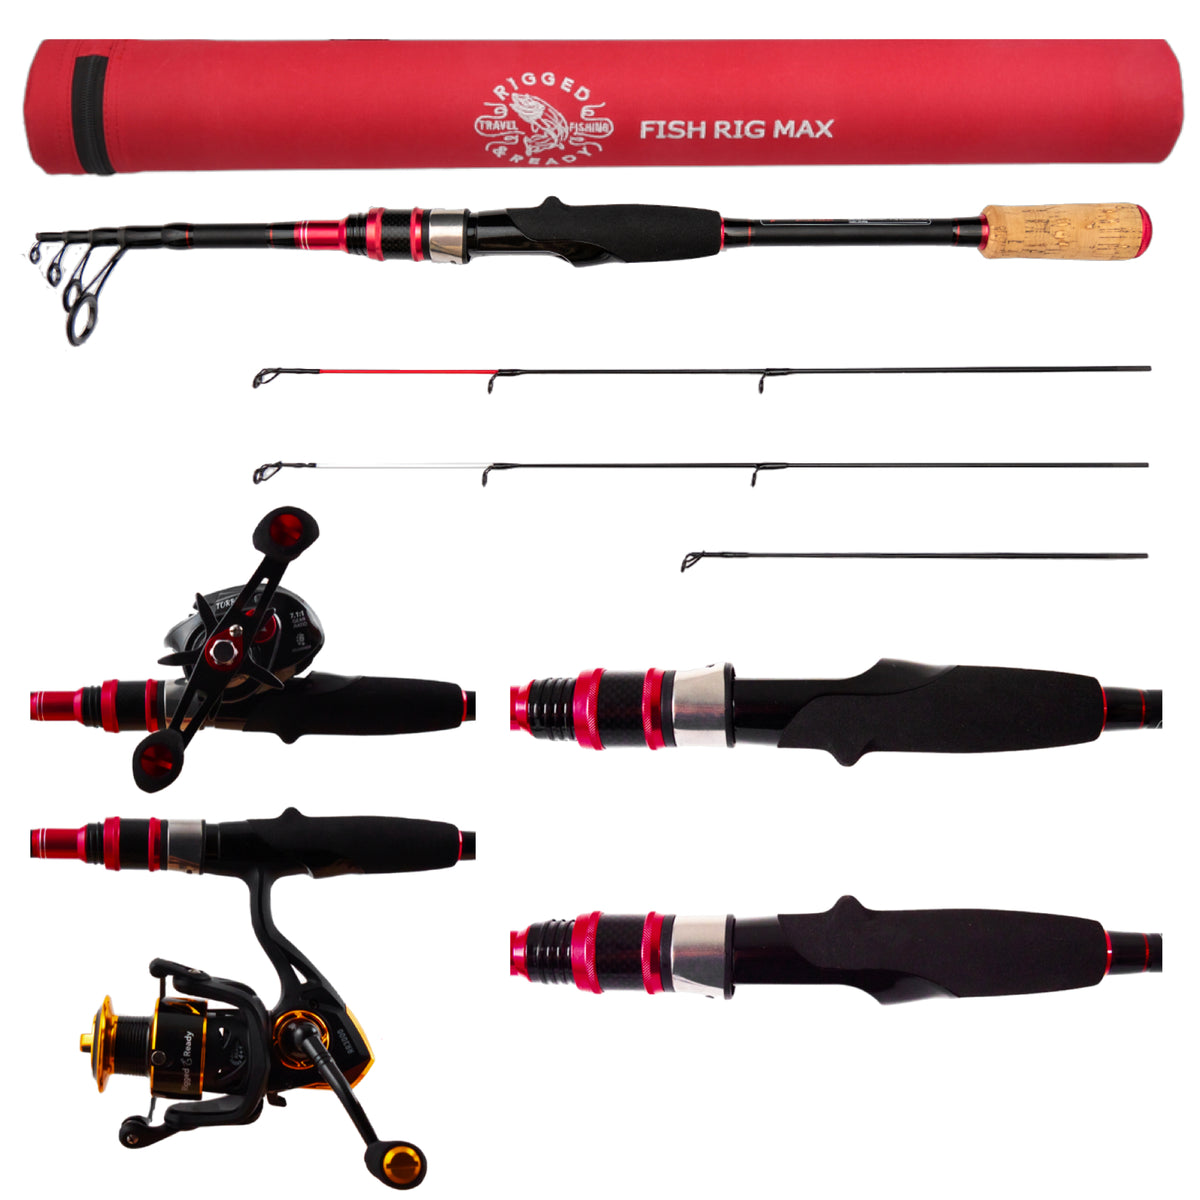 Fish Rig Max Cast-Spin Tele Rod 240 & 210cm Options + 3 Tips